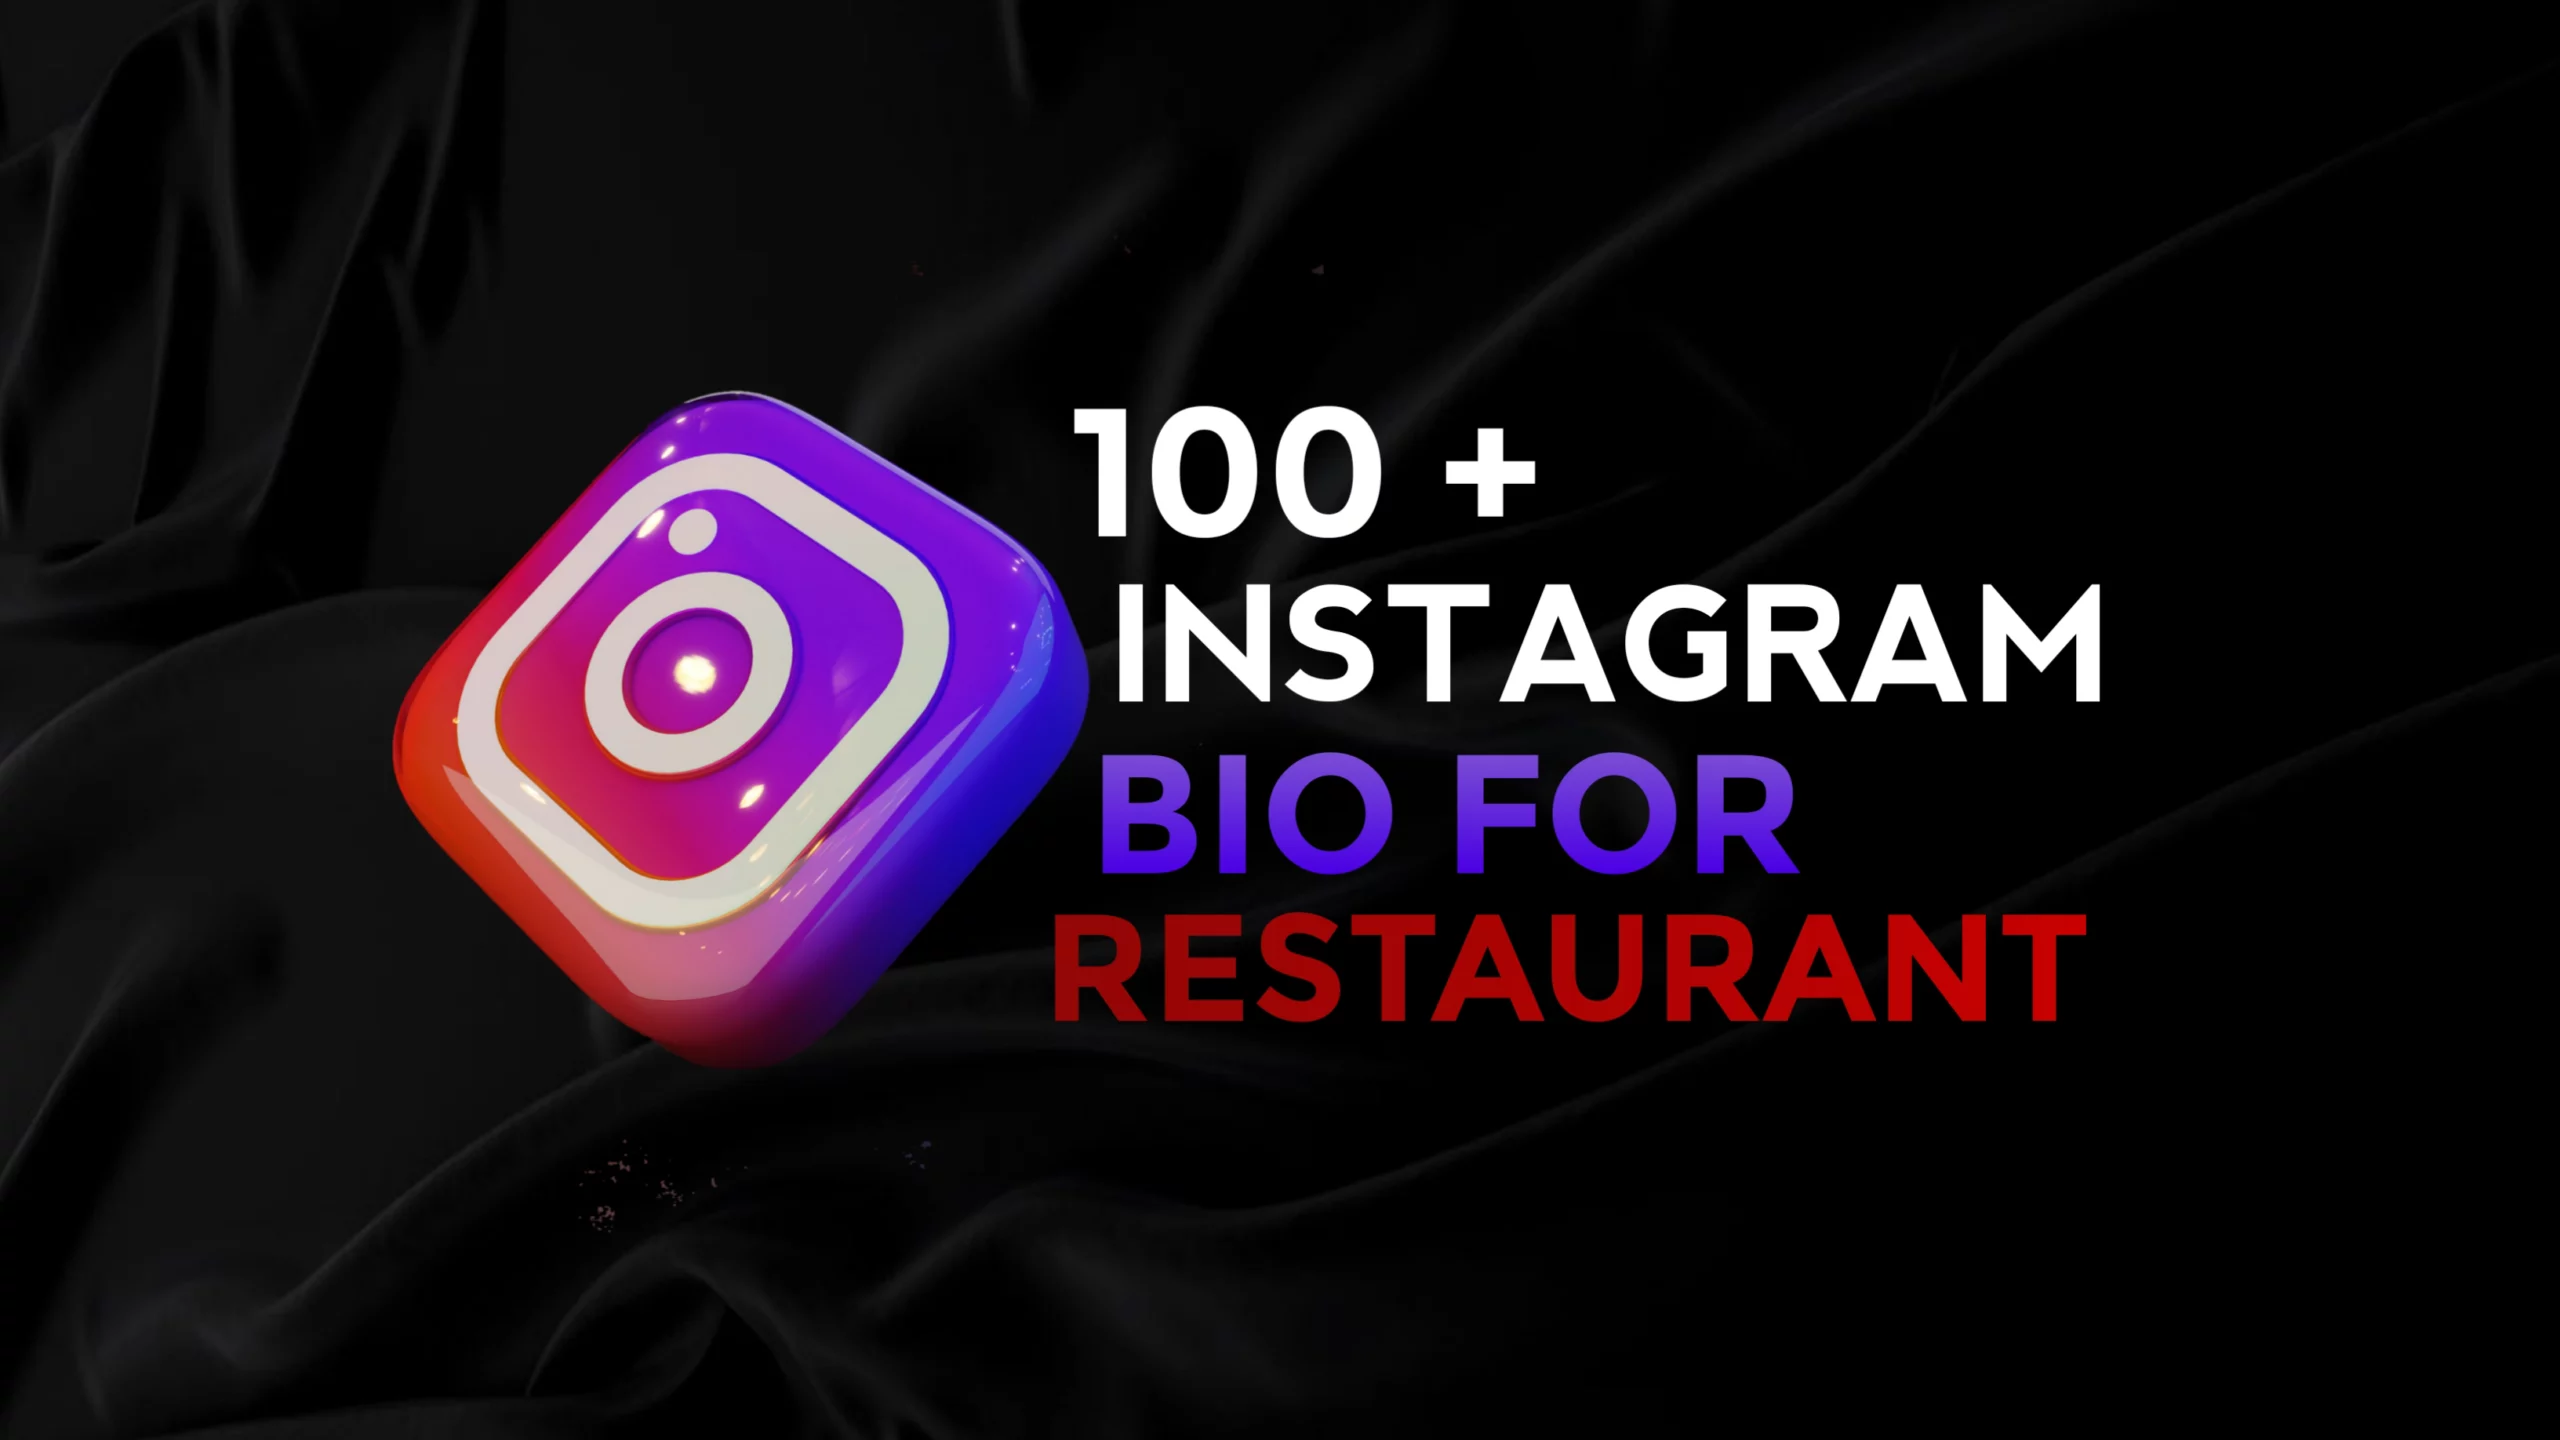 100+ Catchy Restaurant Bio For Instagram To Increase Follower